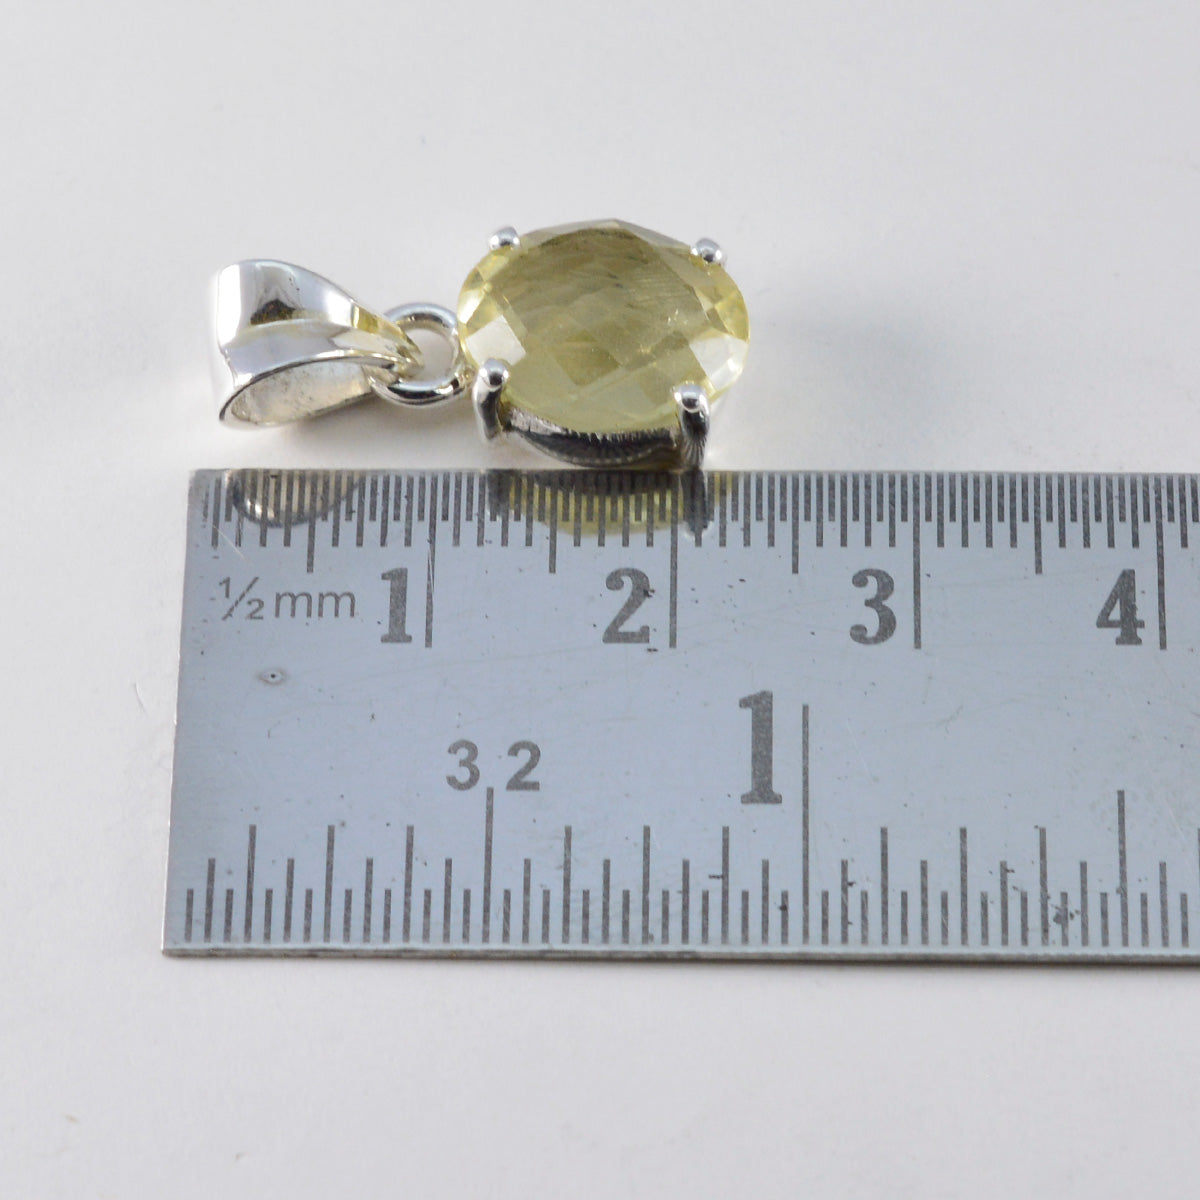 Riyo Knockout Gemstone Oval Faceted Yellow Citrine 933 Sterling Silver Pendant Gift For Birthday